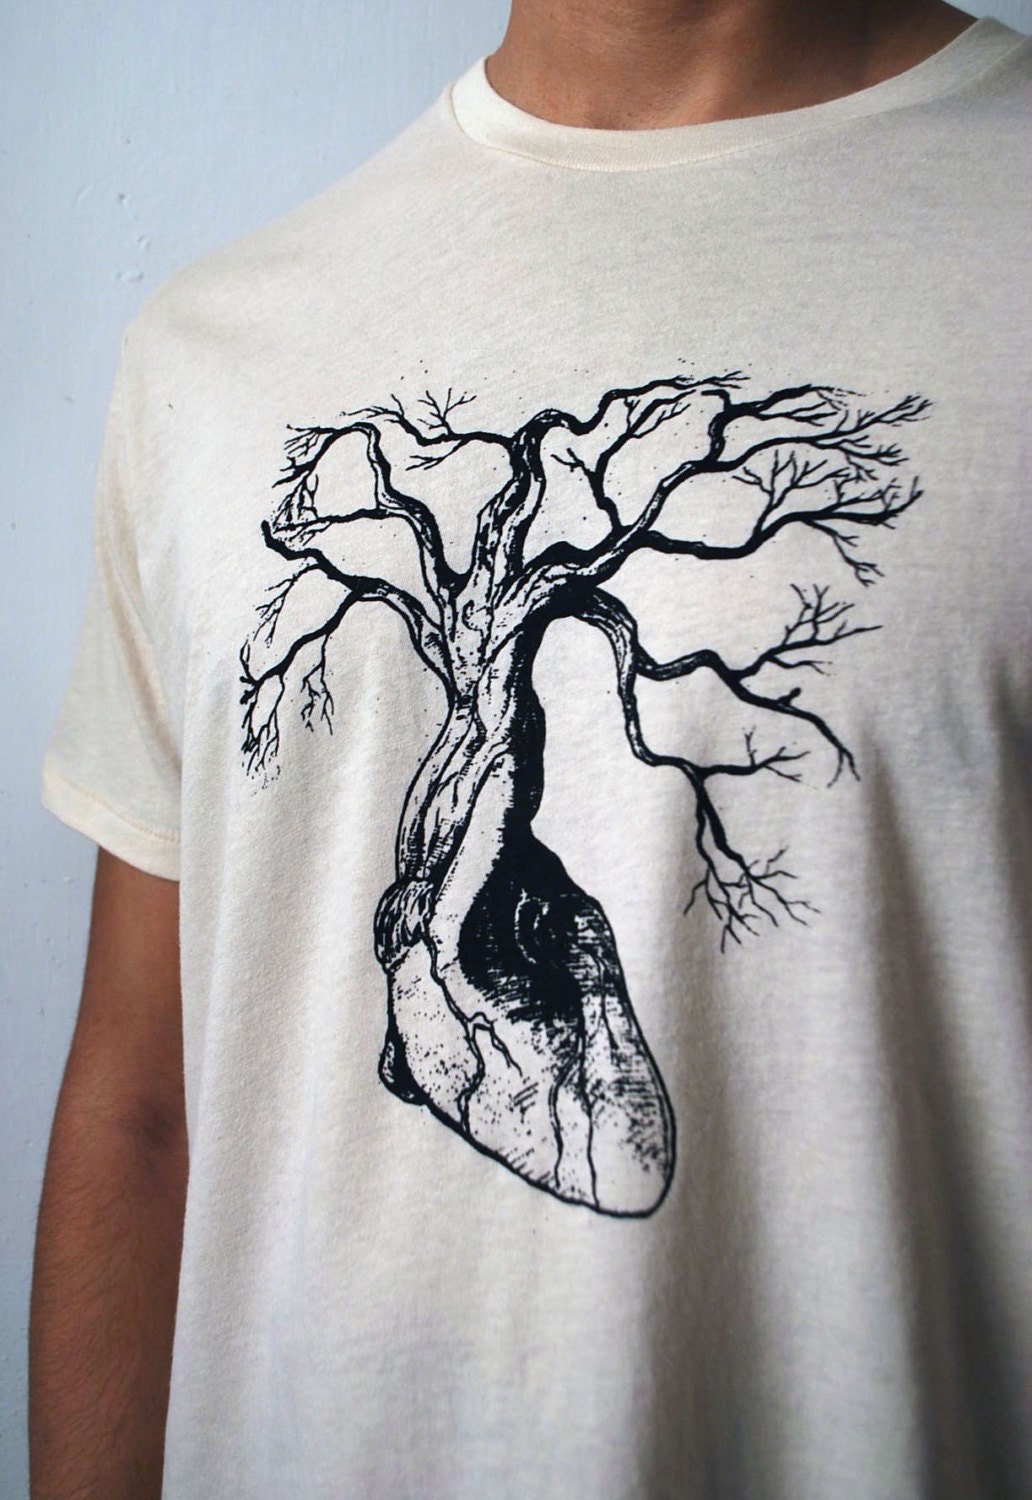 Organic Cotton Mens t-shirt  - XL / Extra Large  - Printed and Ready to Ship to your Valentine